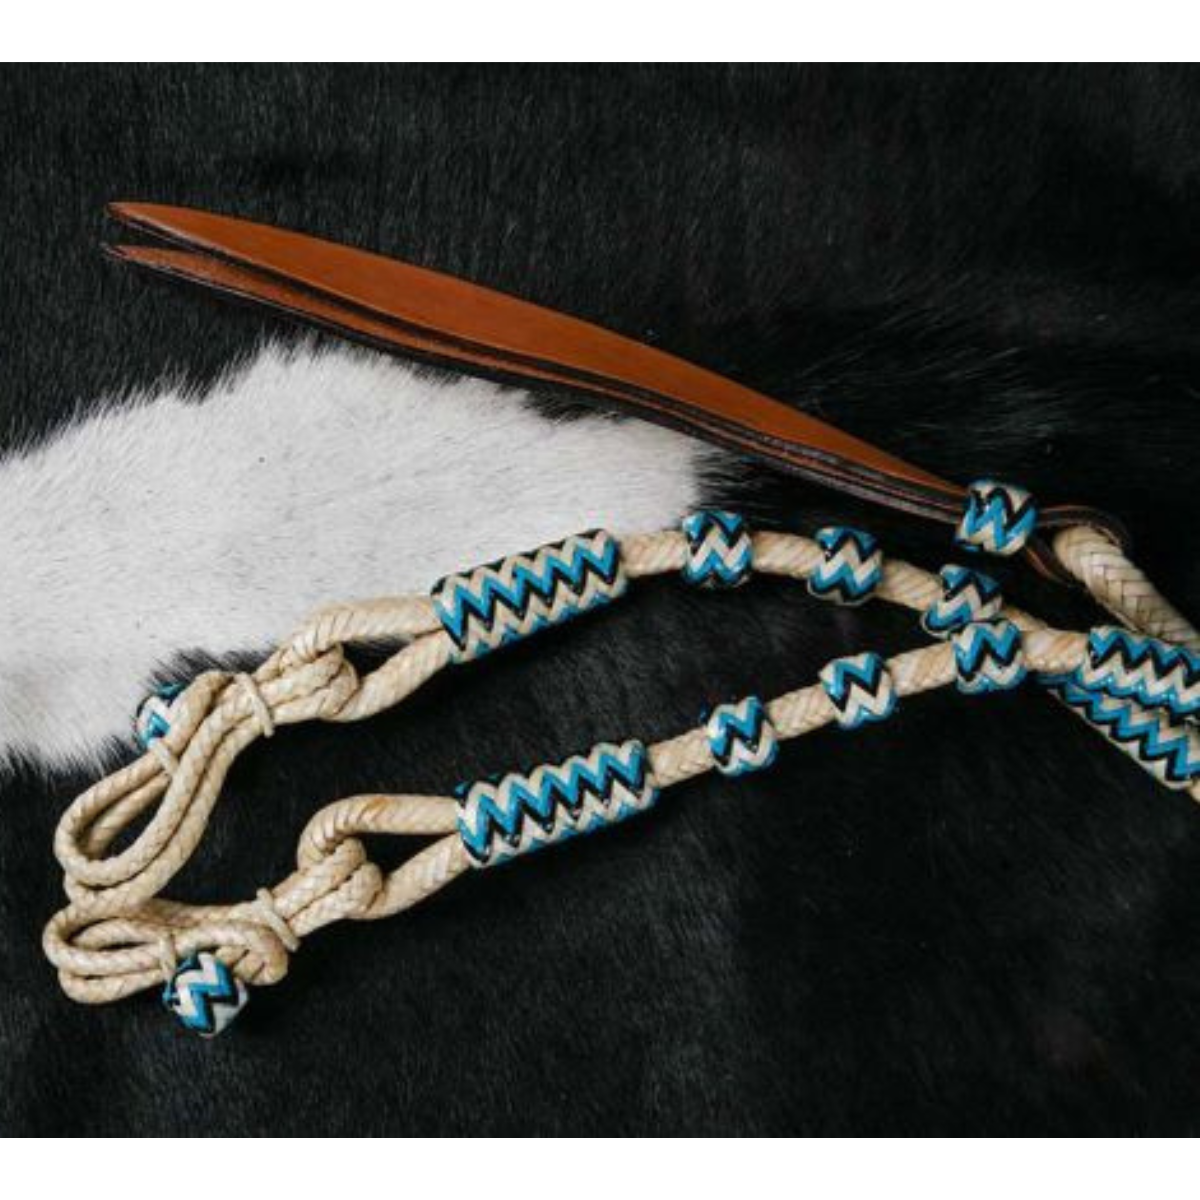 Showman ® Braided Natural Rawhide Romal Reins with Leather Popper and Blue Rawhide Beads. - Double T Saddles